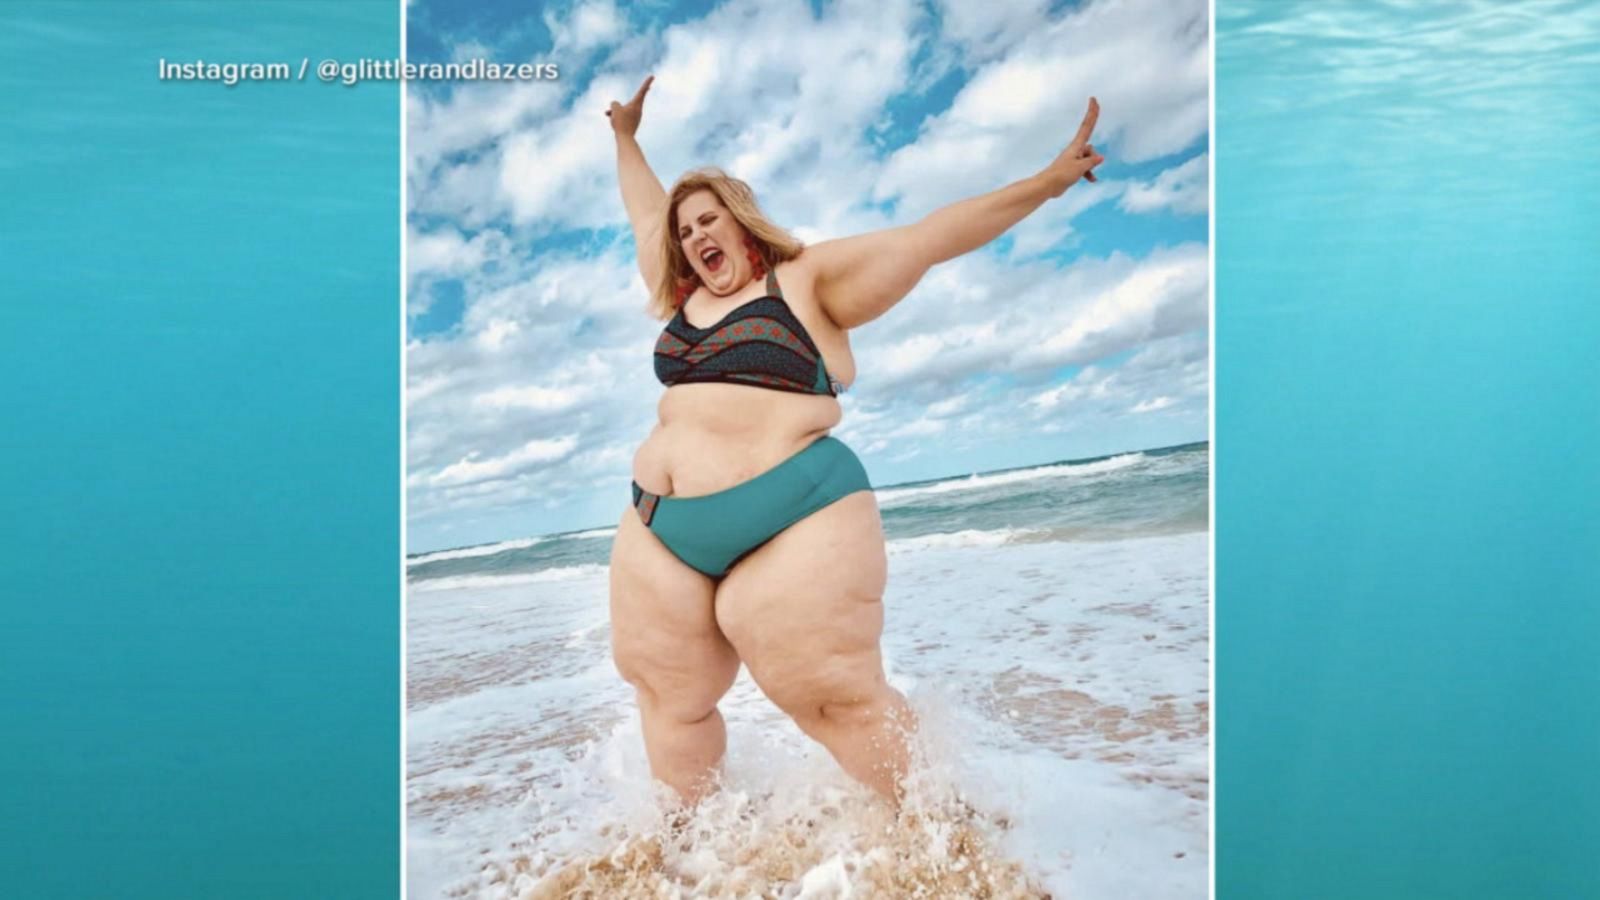 Gillette posted a photo of a plus-size model and Twitter couldn't